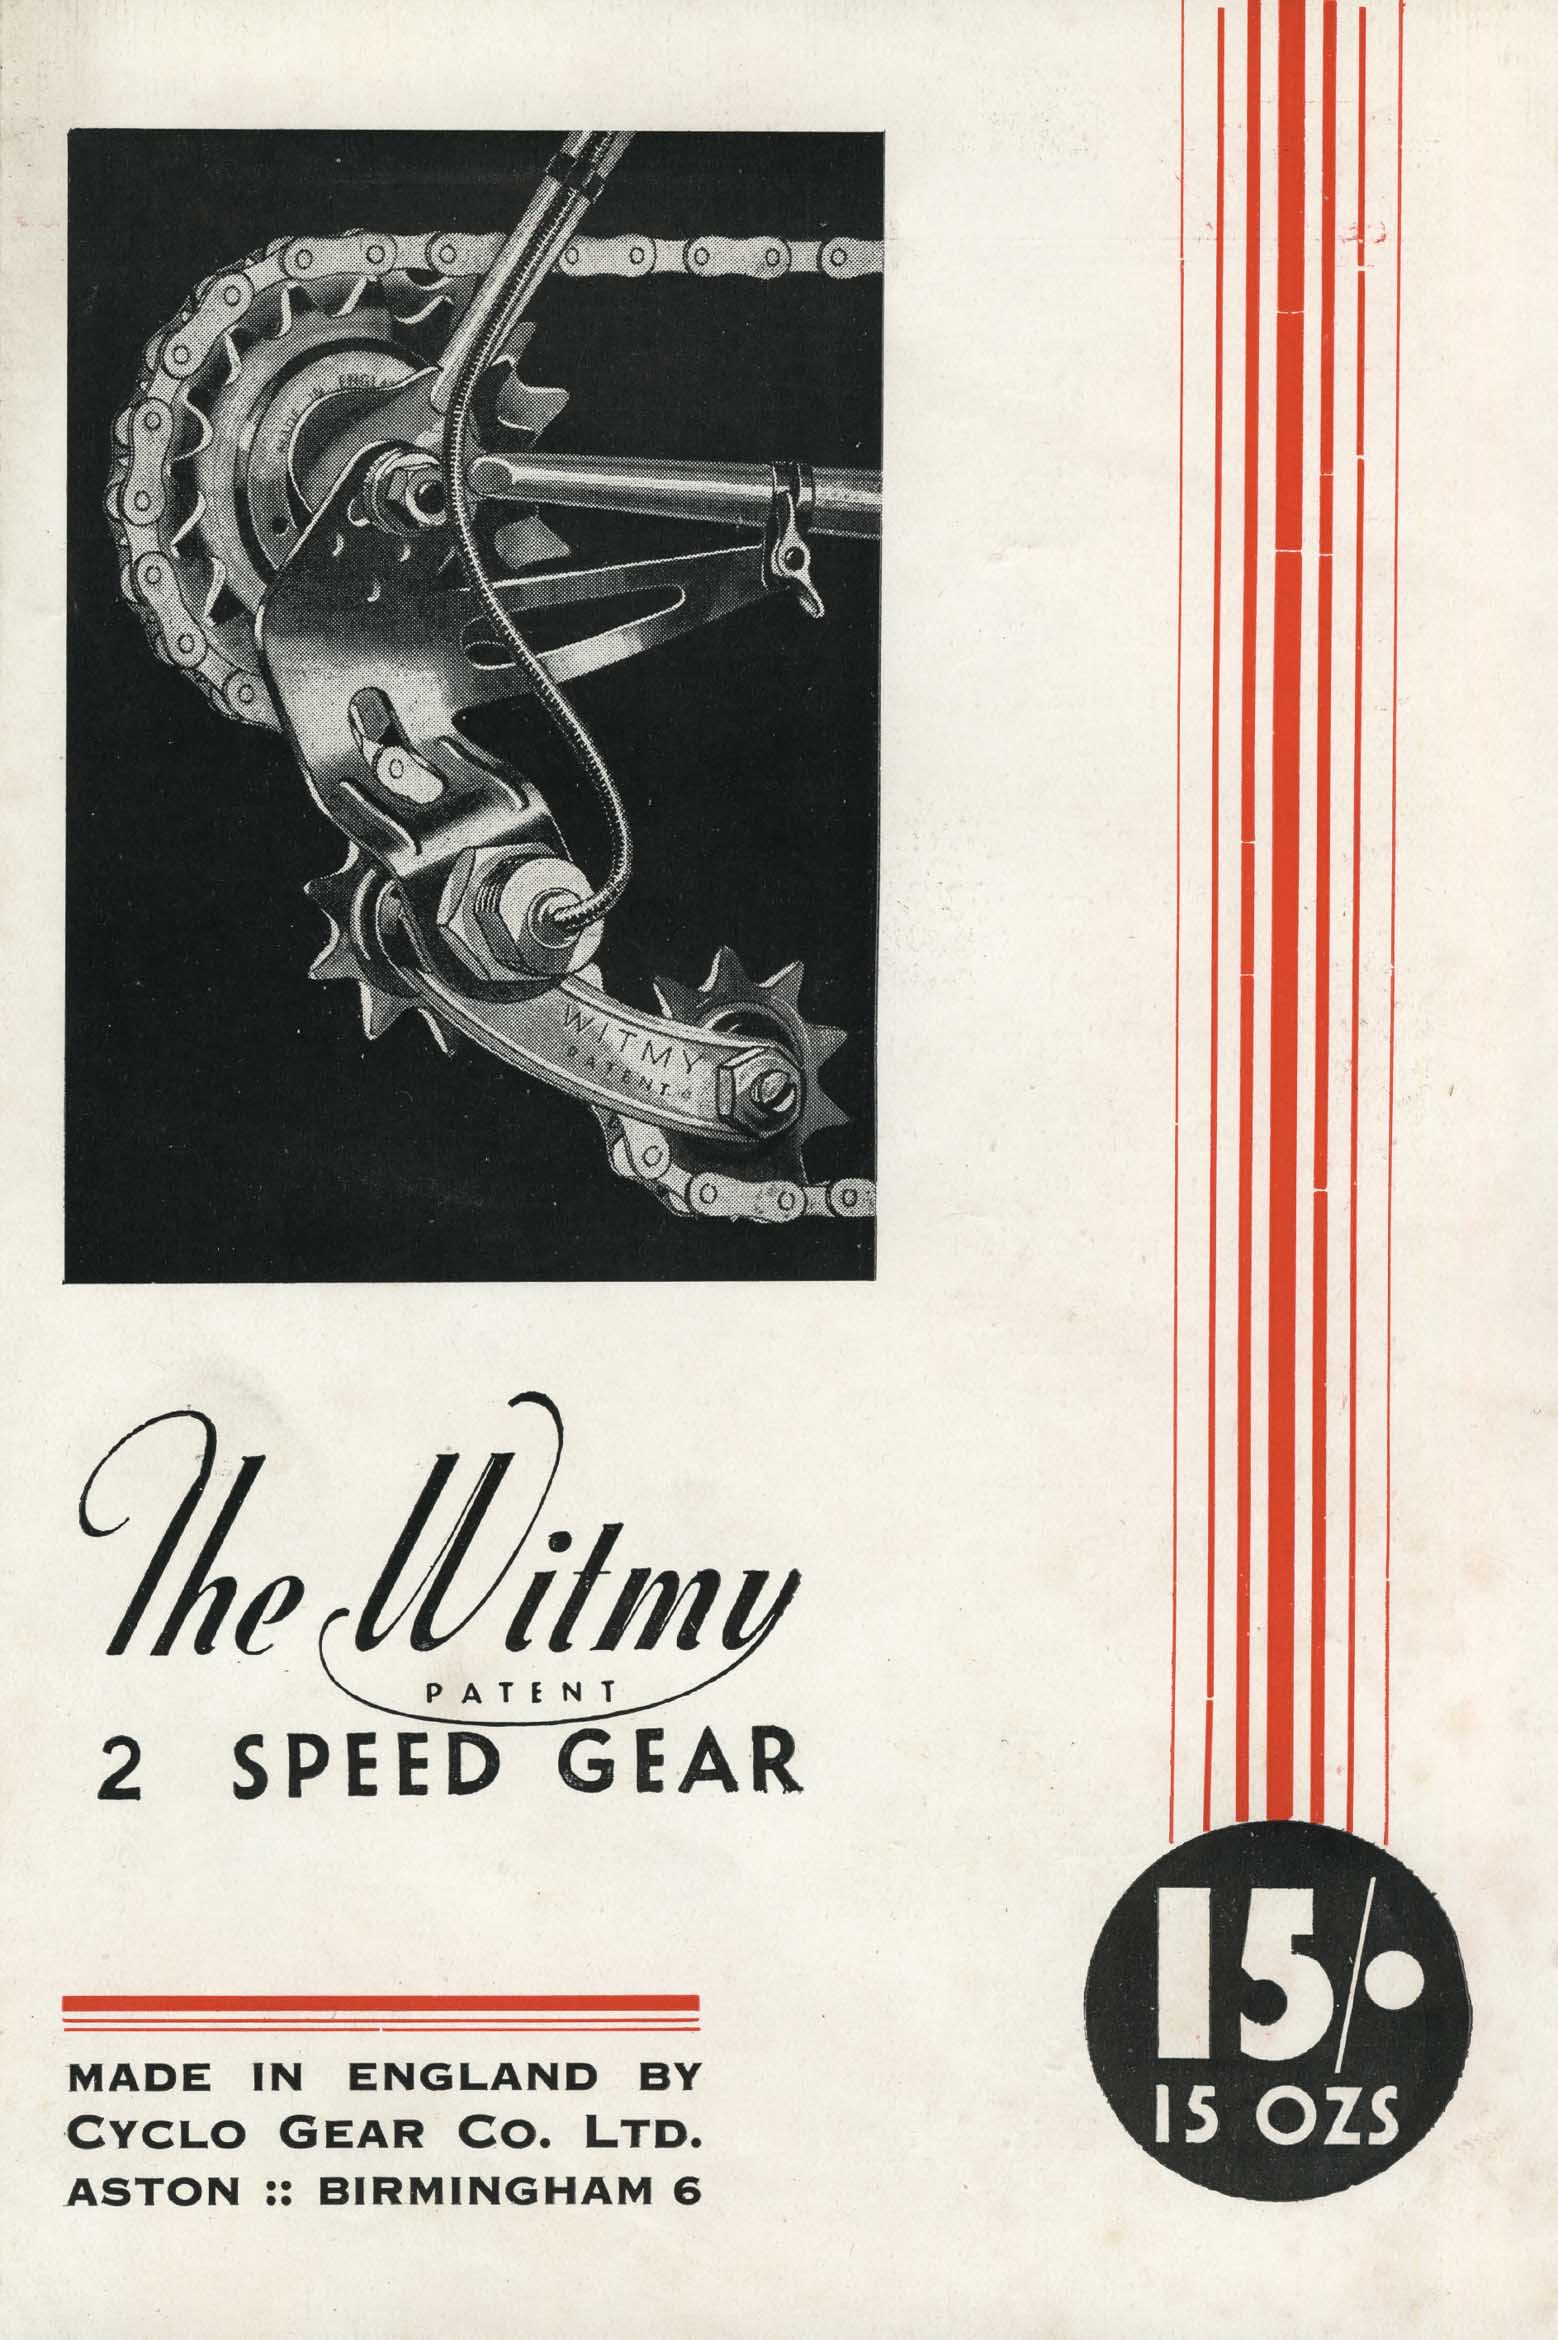 Cyclo Gear Company - The Witmy scan 01 main image